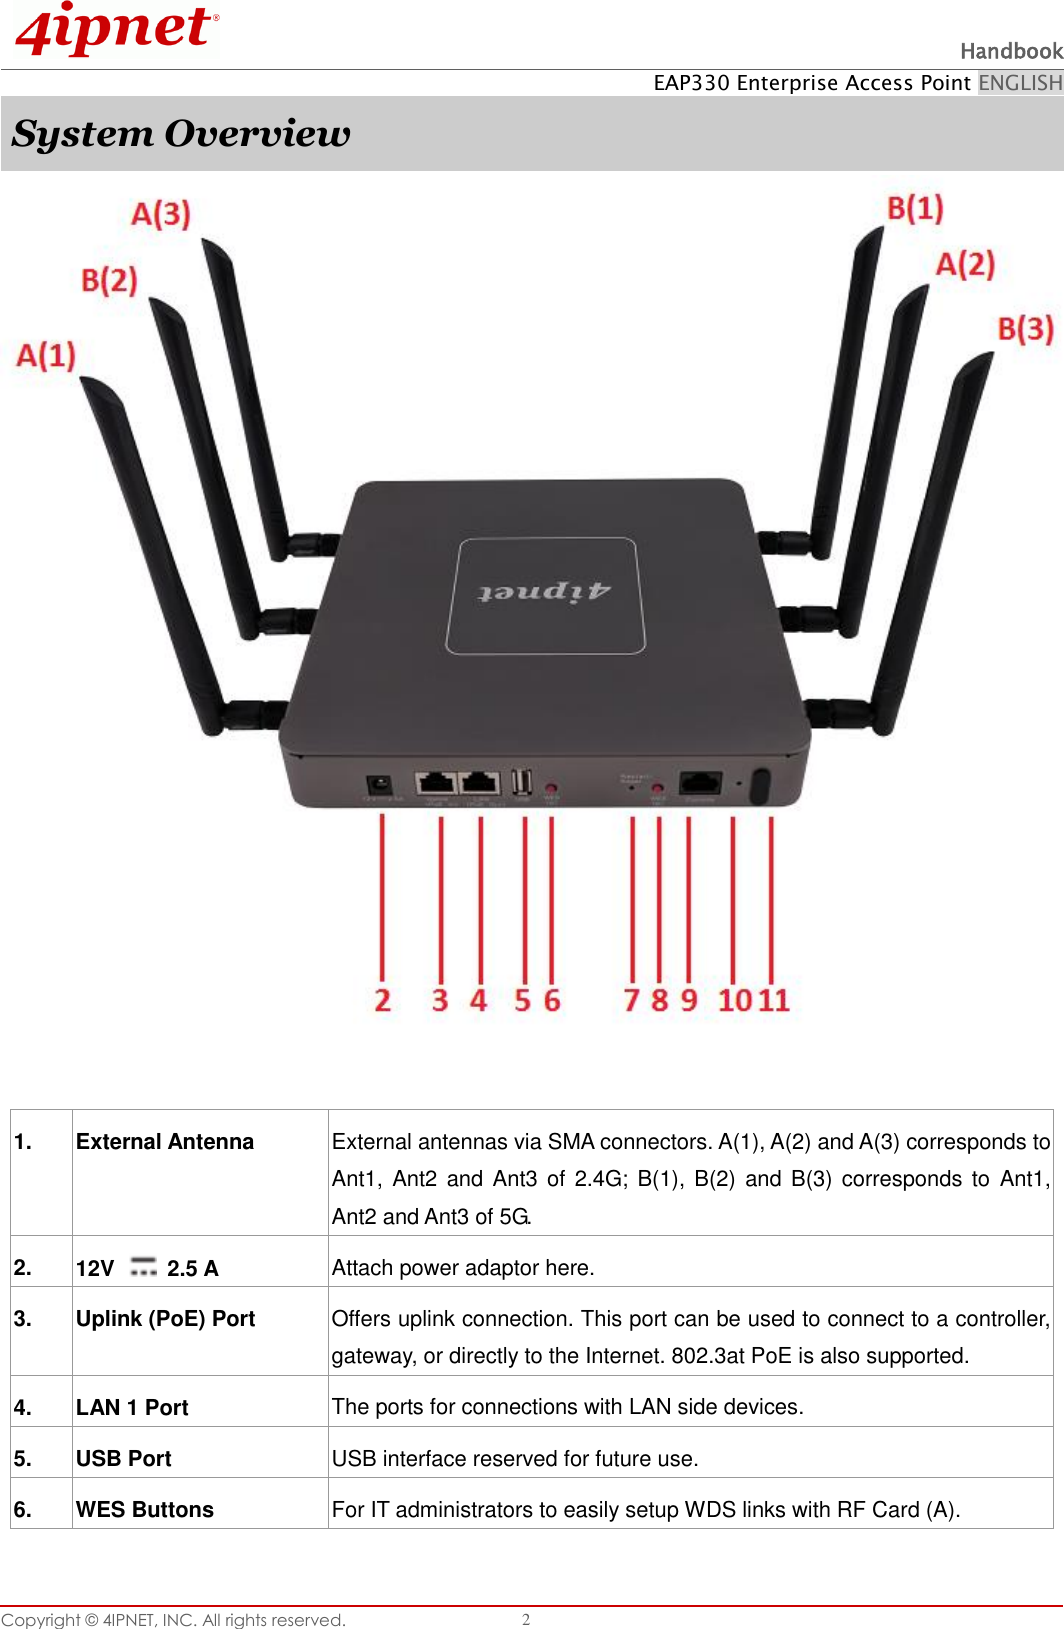  Handbook EAP330 Enterprise Access Point ENGLISH Copyright ©  4IPNET, INC. All rights reserved.   2 System Overview   1.   External Antenna External antennas via SMA connectors. A(1), A(2) and A(3) corresponds to Ant1, Ant2  and Ant3 of 2.4G; B(1),  B(2) and B(3) corresponds  to  Ant1, Ant2 and Ant3 of 5G. 2.   12V    2.5 A Attach power adaptor here. 3.   Uplink (PoE) Port Offers uplink connection. This port can be used to connect to a controller, gateway, or directly to the Internet. 802.3at PoE is also supported. 4.   LAN 1 Port The ports for connections with LAN side devices. 5.   USB Port USB interface reserved for future use. 6.   WES Buttons For IT administrators to easily setup WDS links with RF Card (A). 